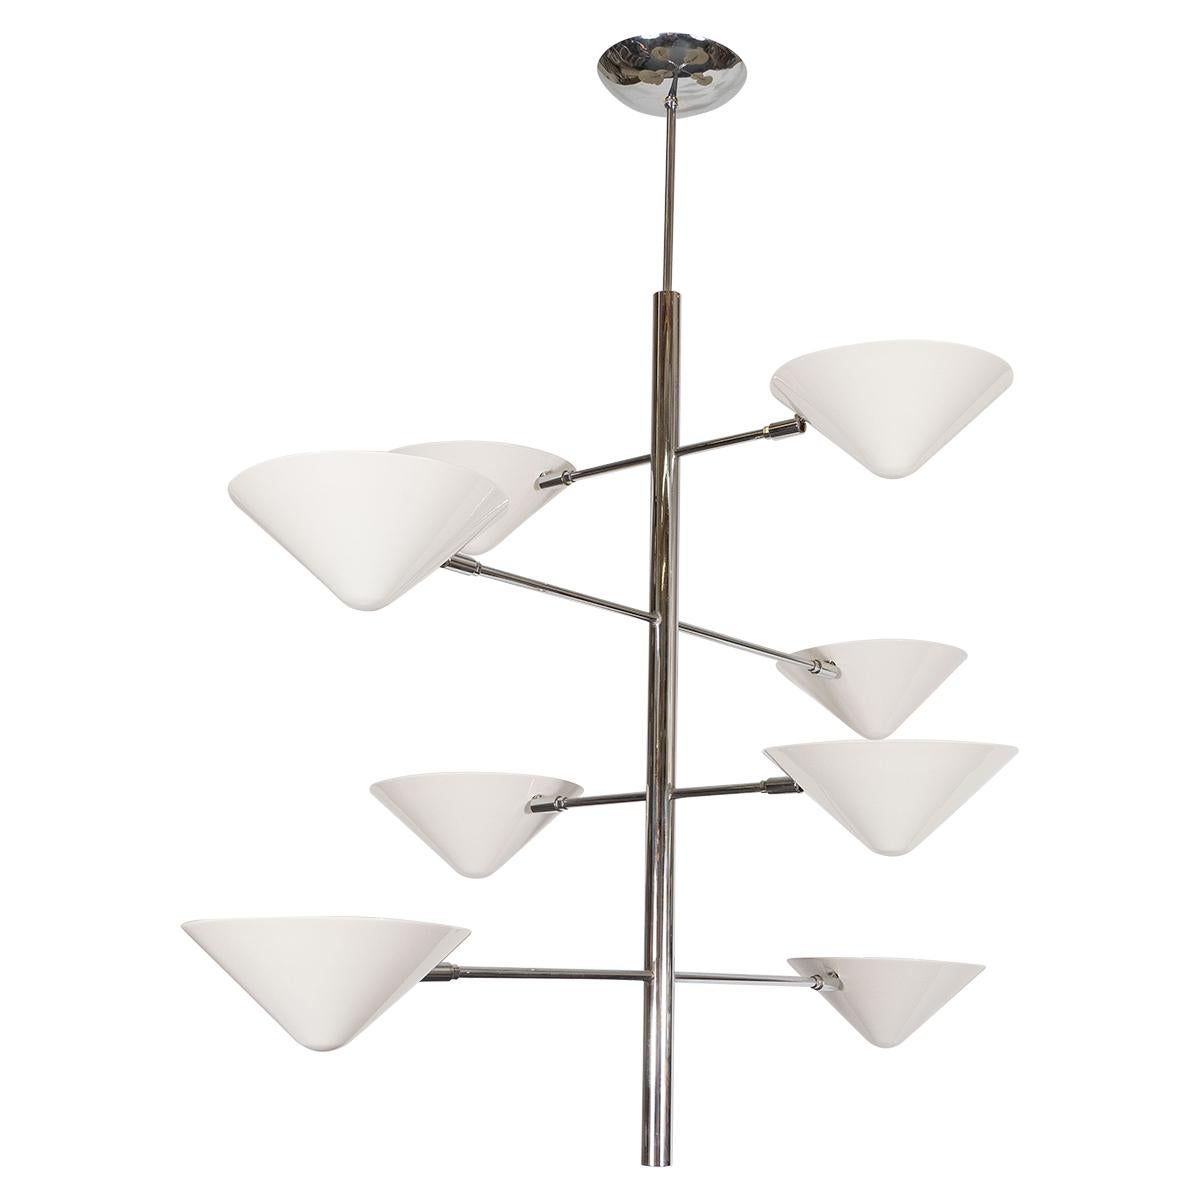 Eight-arm polished nickel chandelier with conical enameled metal uplight shades.